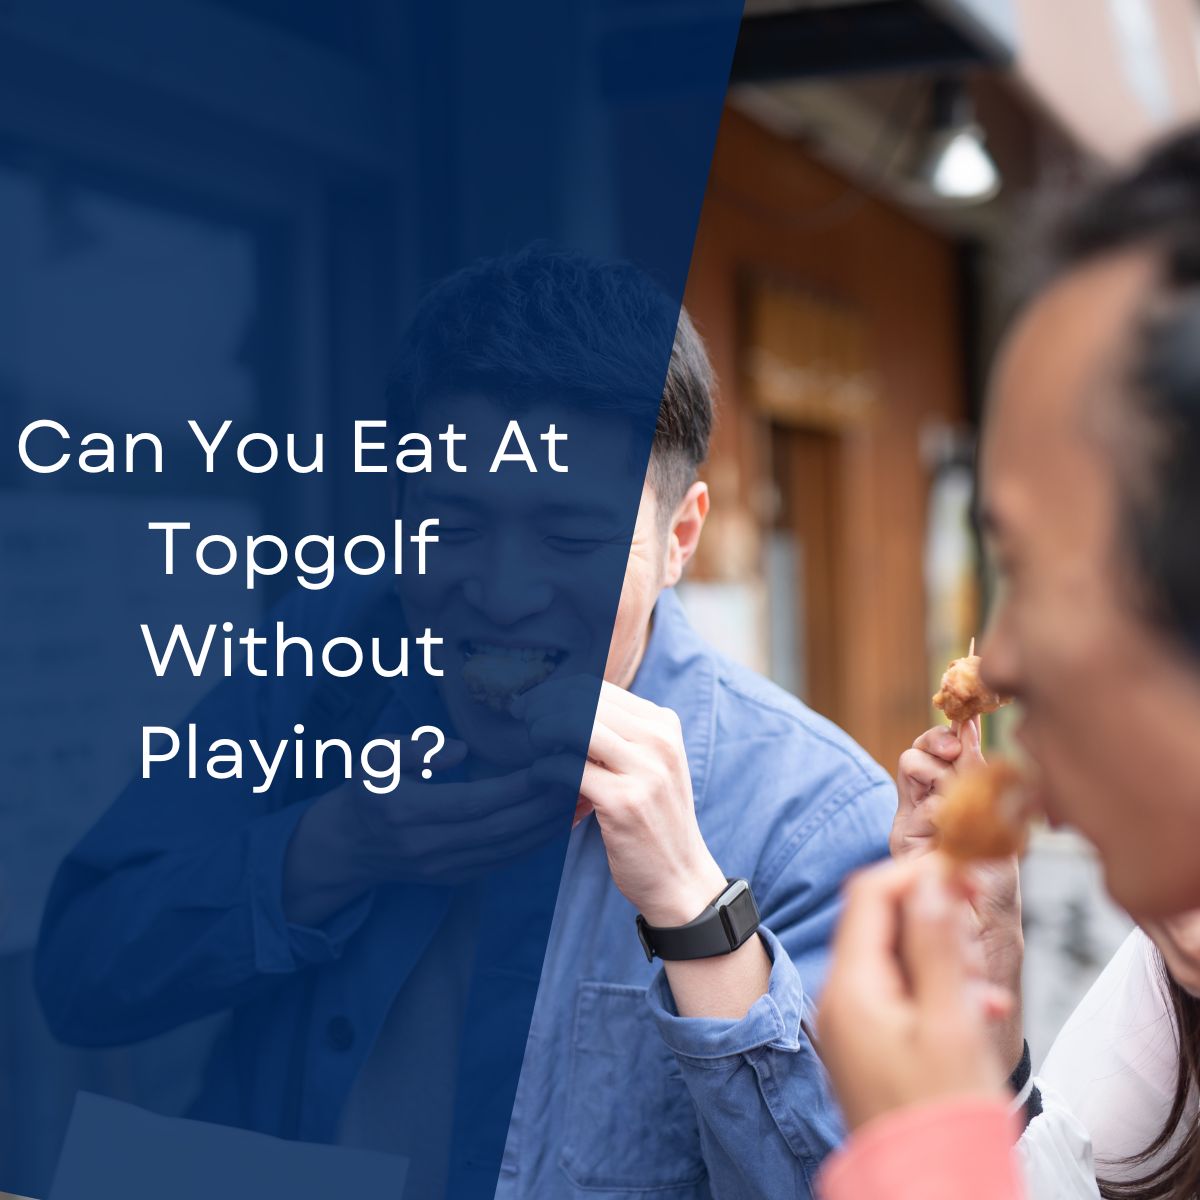 Can You Eat At Topgolf Without Playing?